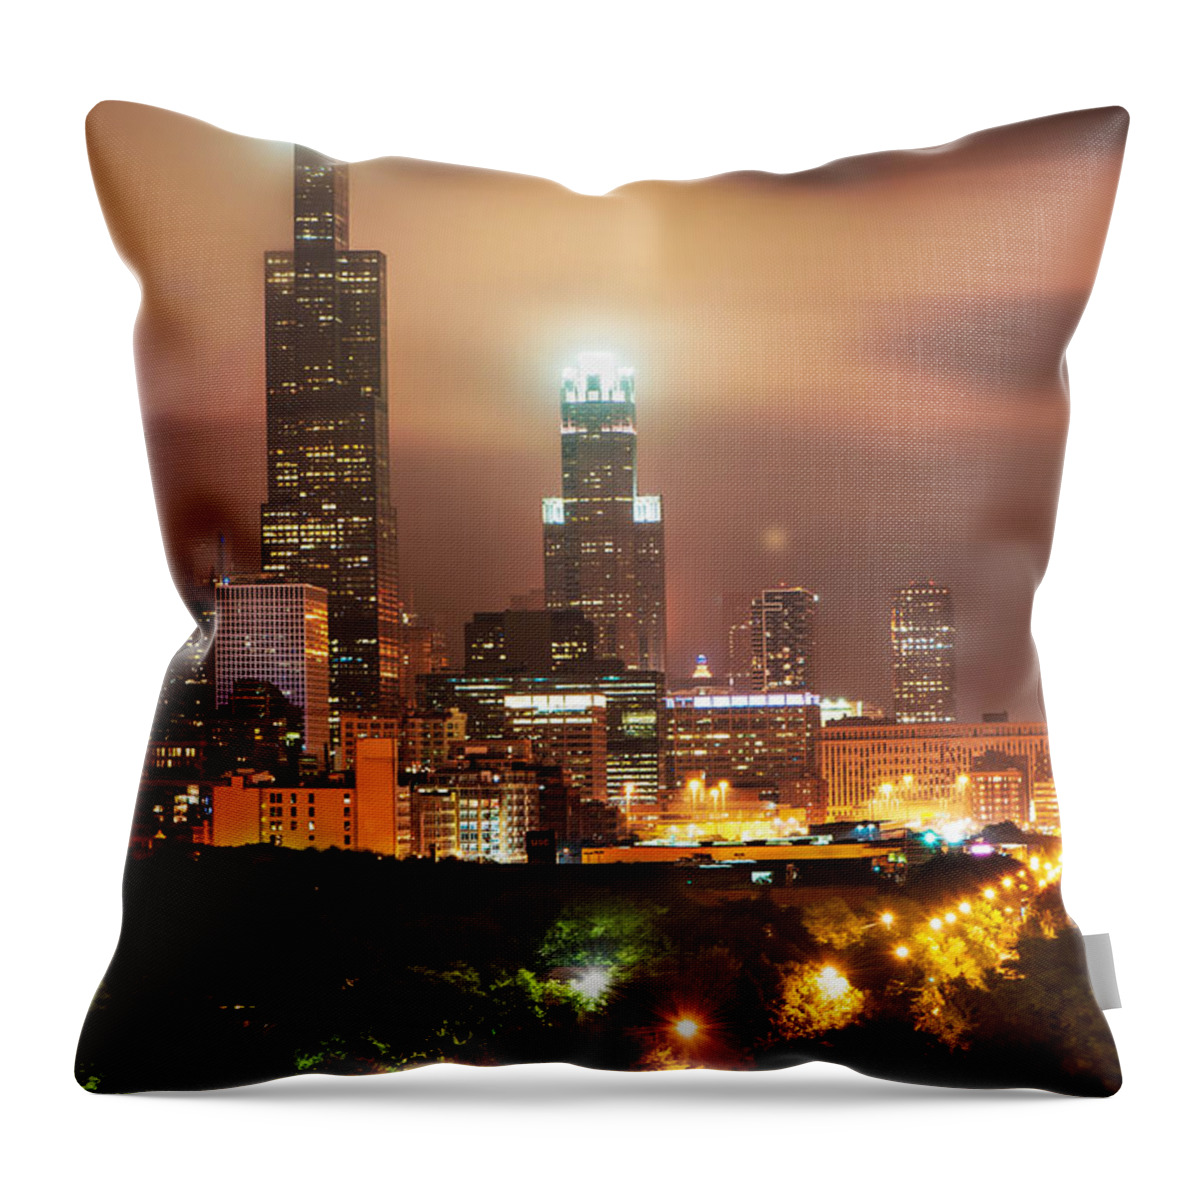 America Throw Pillow featuring the photograph Distant Lights - Chicago Illinois Skyline by Gregory Ballos